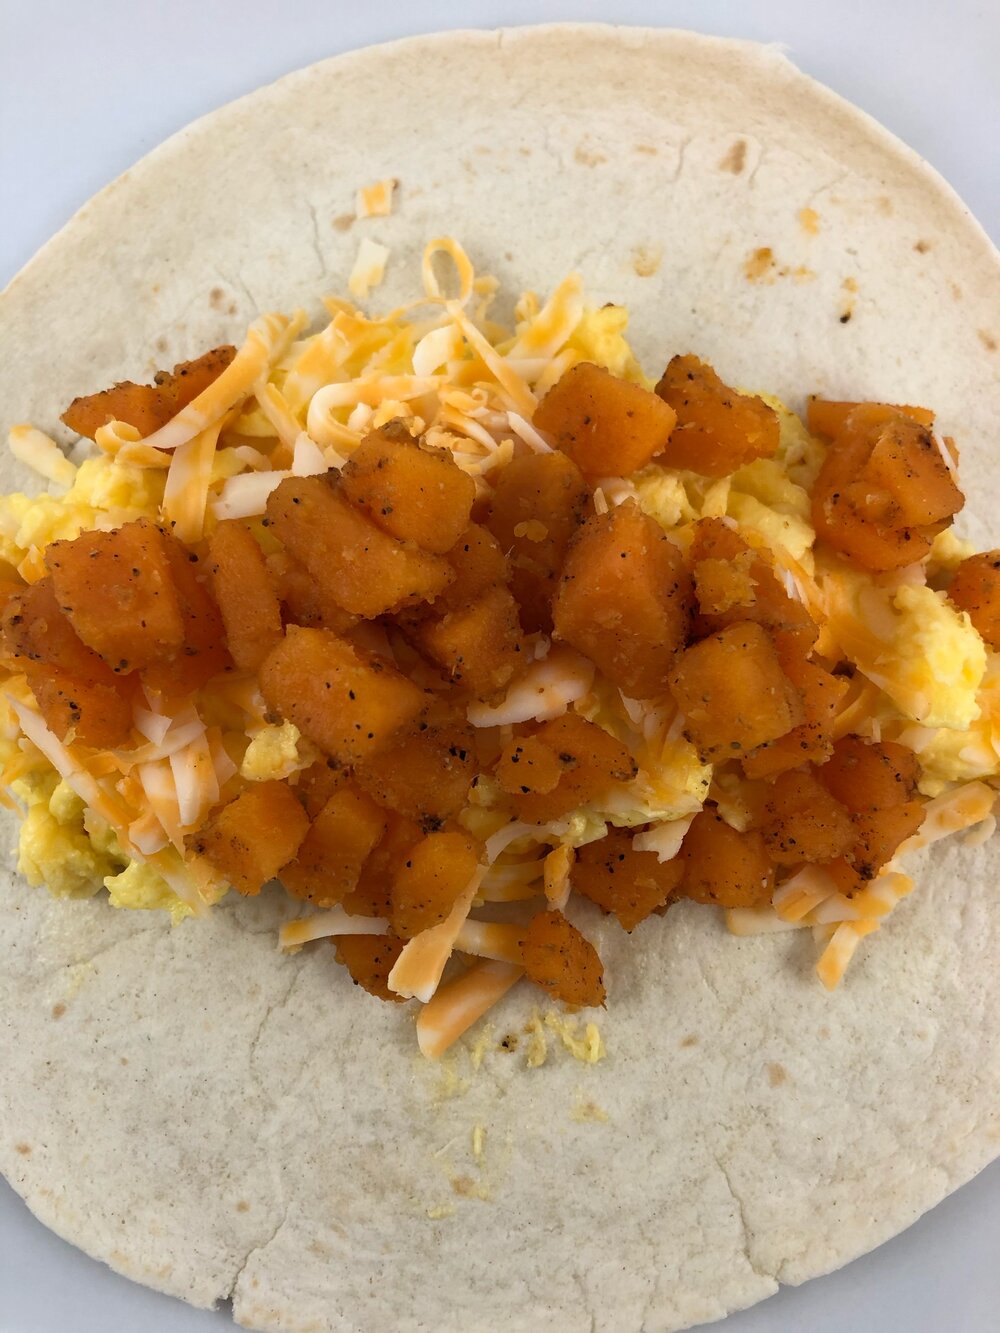 A Southwest breakfast burrito with scrambled eggs, cheese, sweet potatoes, spices, and salsa. Missouri girl.A Southwest breakfast burrito with scrambled eggs, cheese, sweet potatoes, spices, and salsa. Missouri girl. Missouri Girl Blog. #breakfast #brunch #breakfastburritos #eggs #sweetpotato #Missourigirl #Missourigirlblog